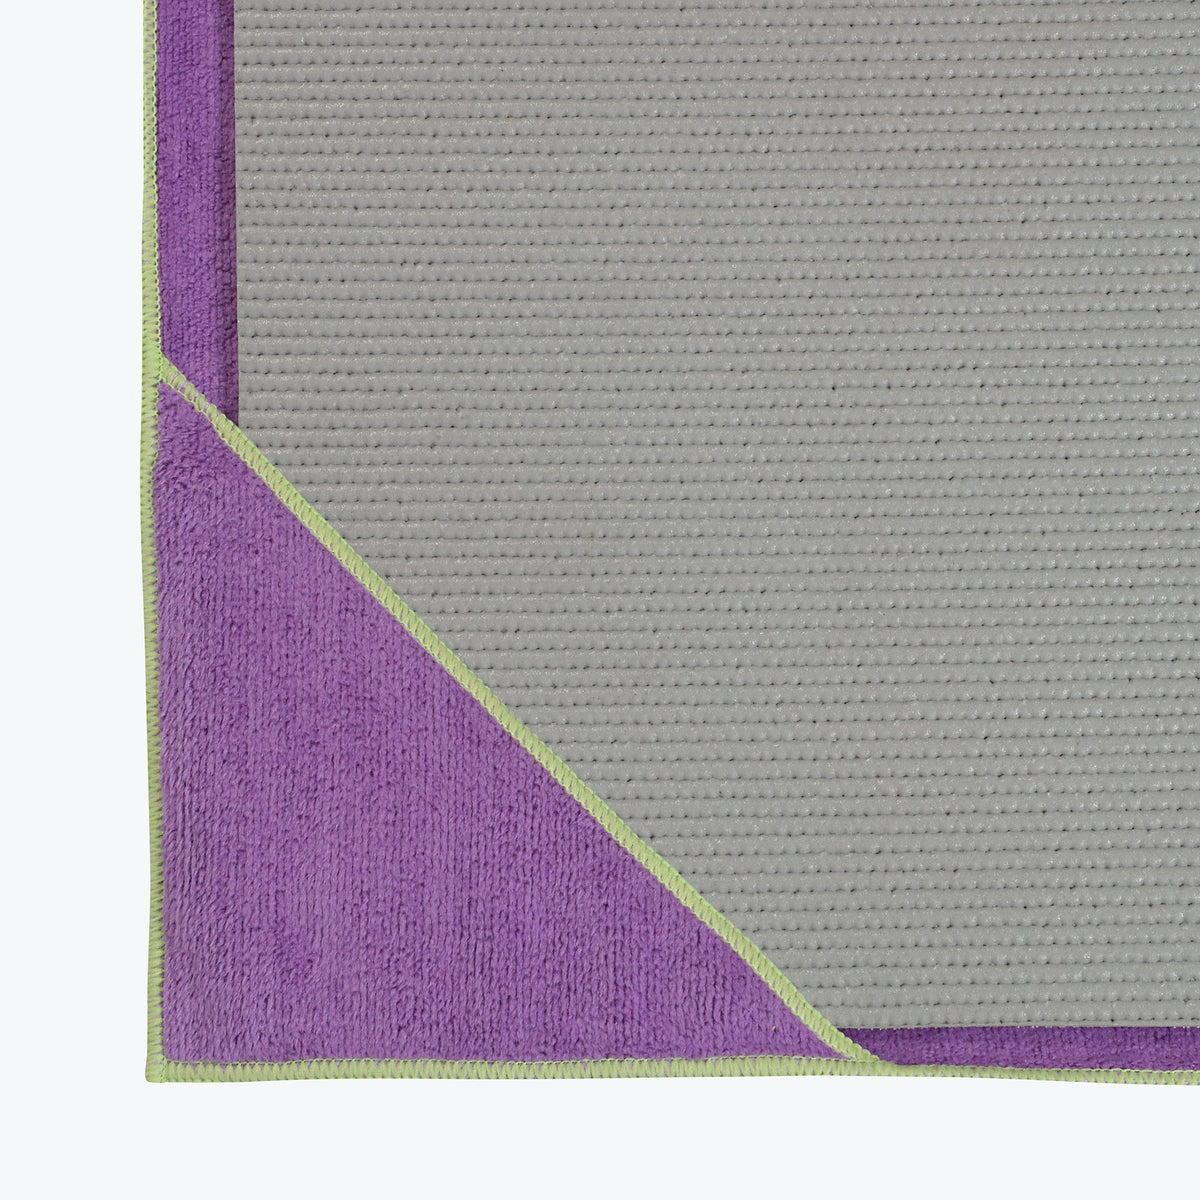 Stay-Put Yoga Towel over the mat